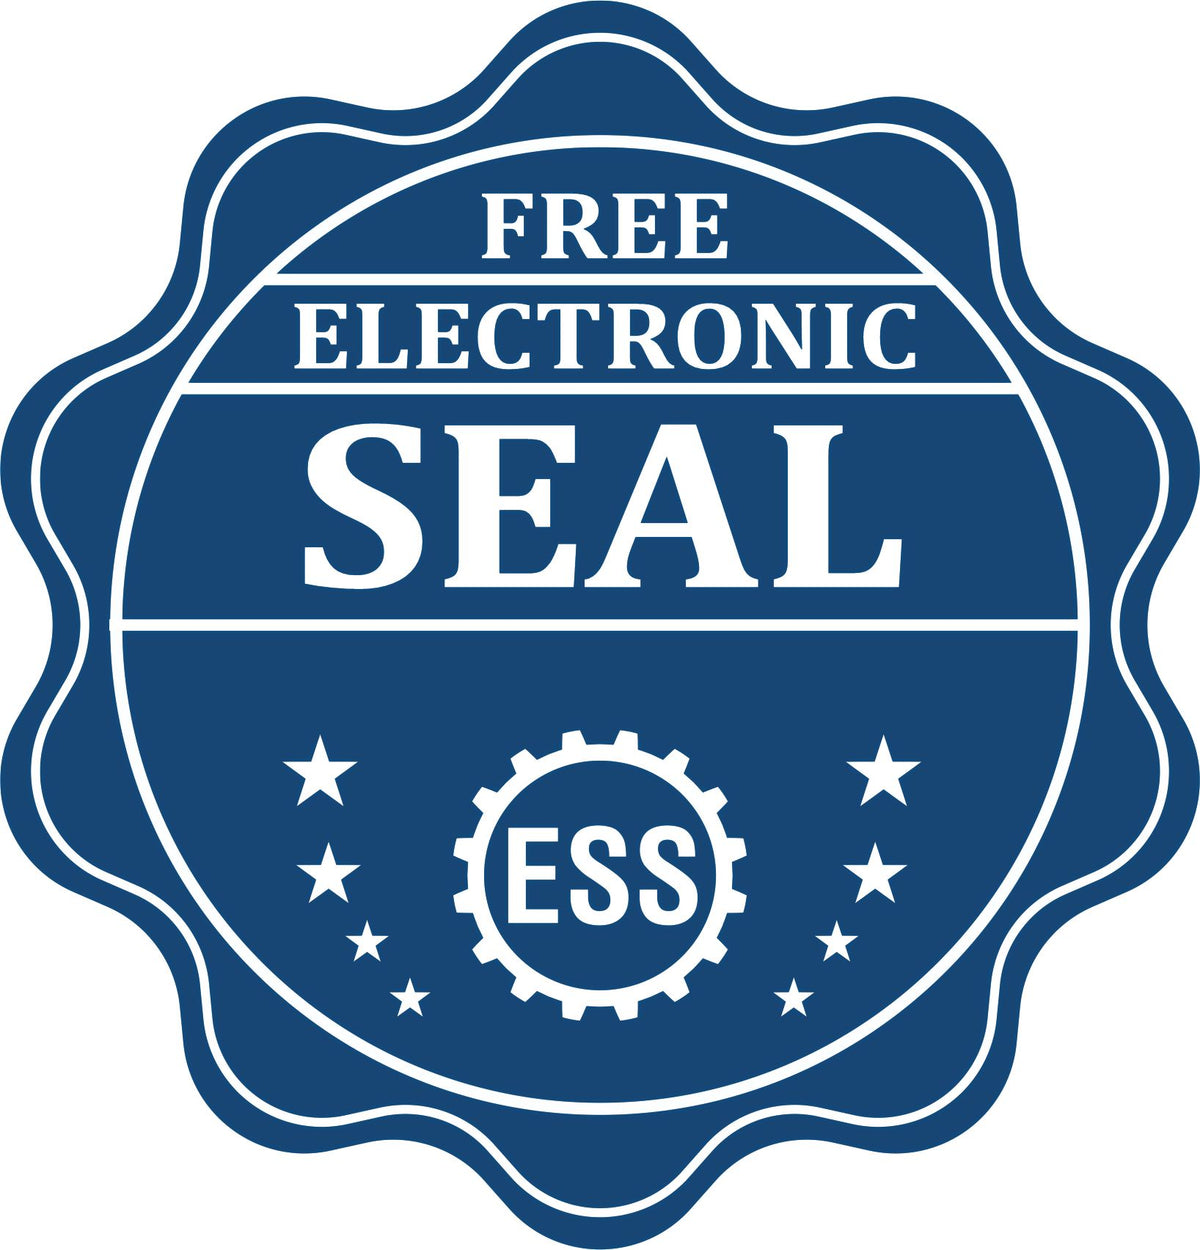 A badge showing a free electronic seal for the Soft Virginia Professional Engineer Seal with stars and the ESS gear on the emblem.